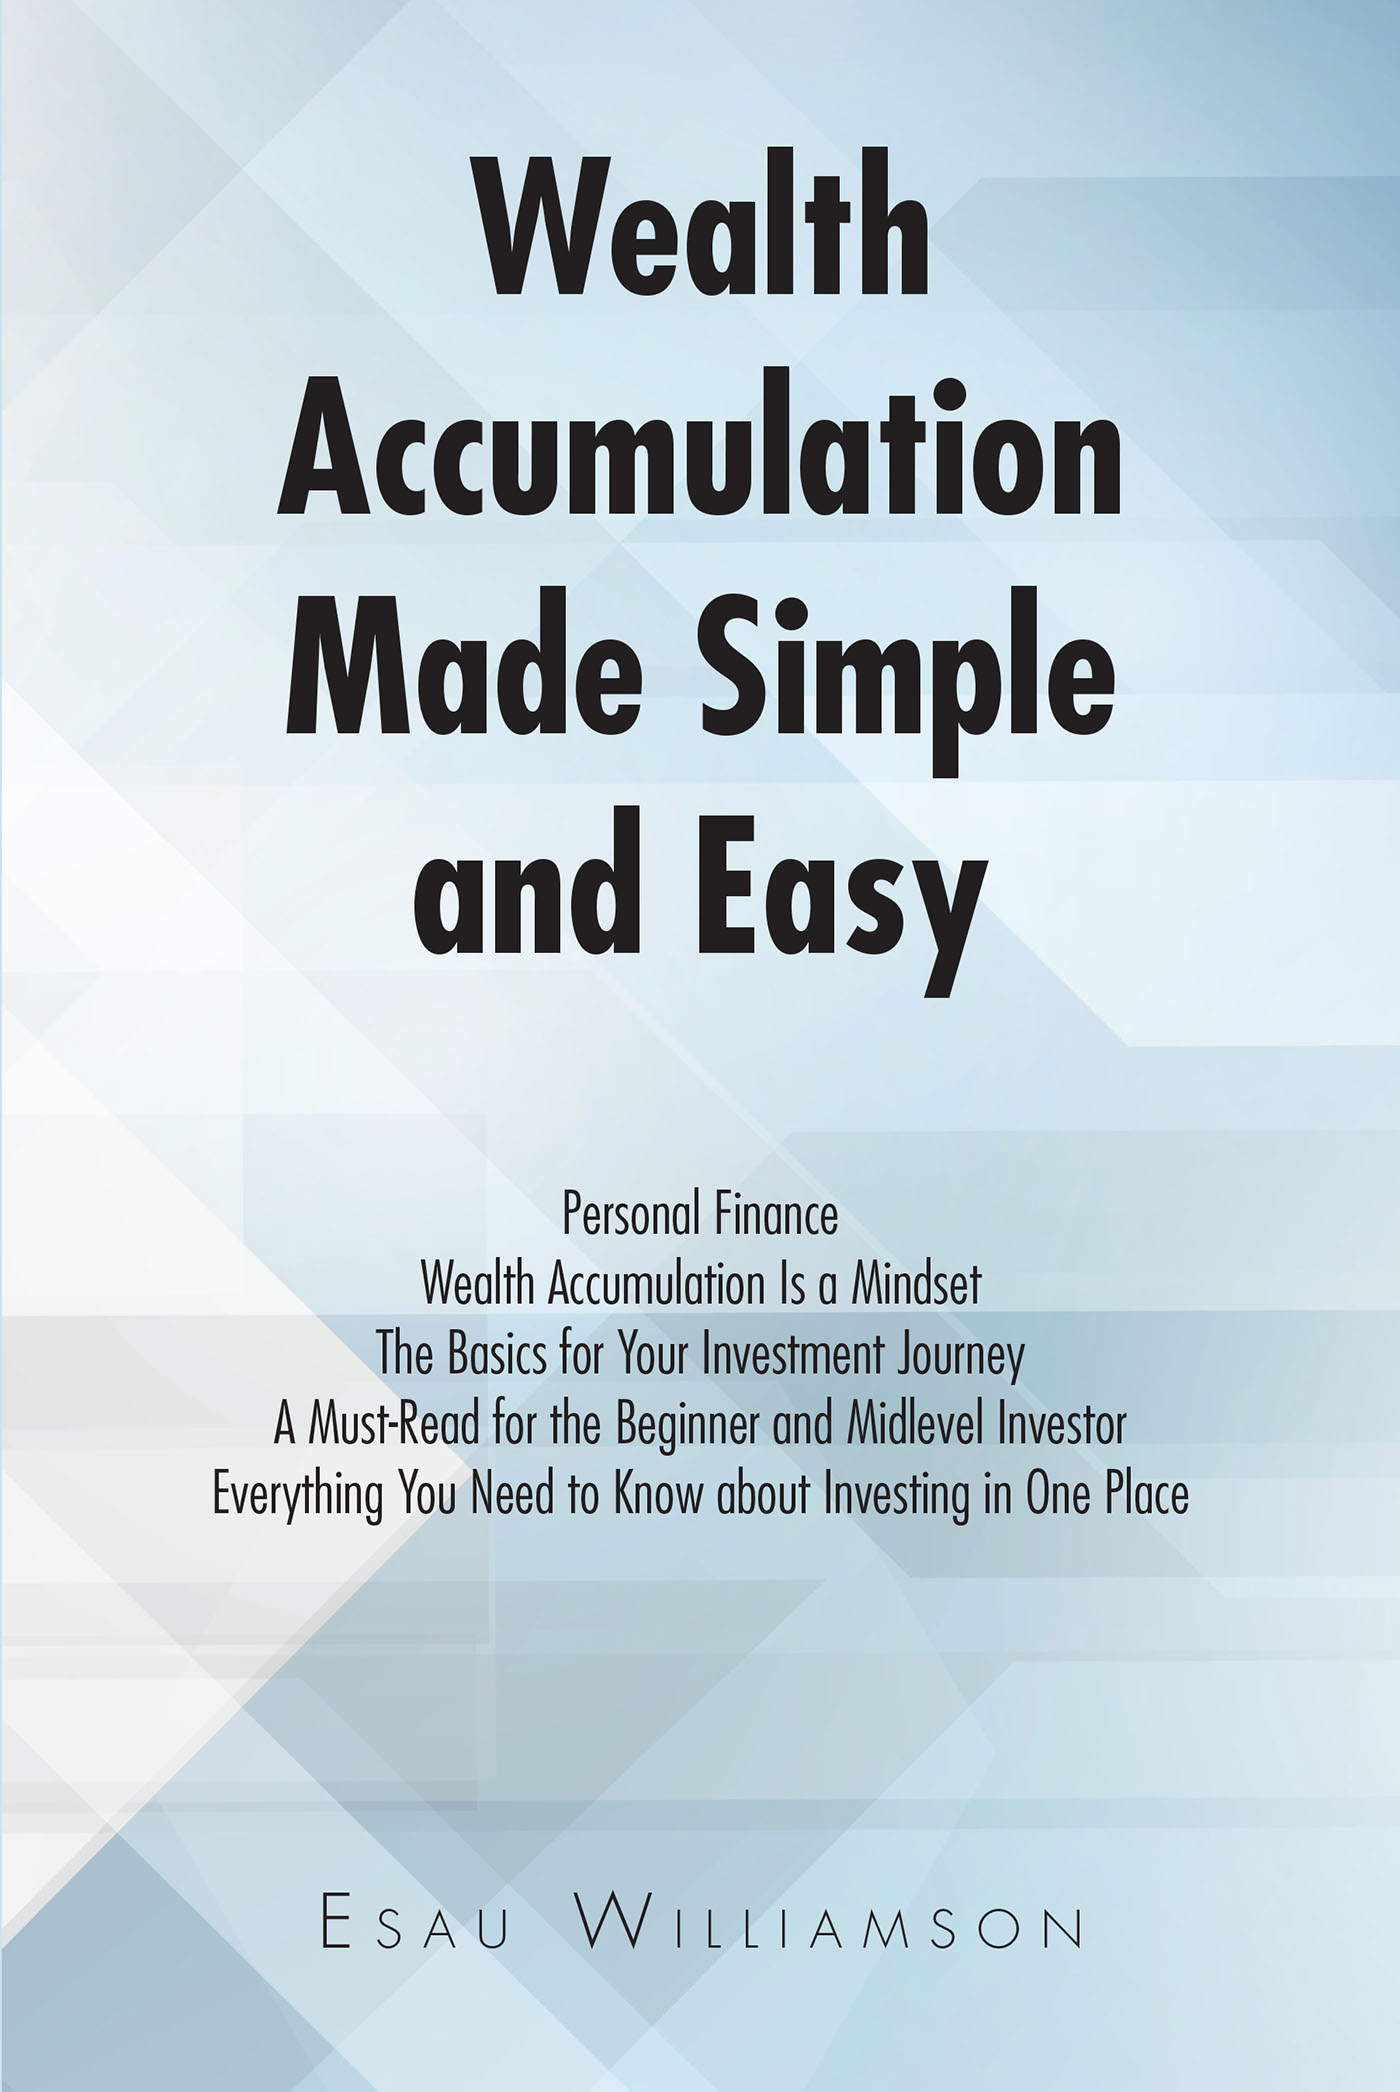 Esau Williamson’s Newly Released "Wealth Accumulation Made Simple and Easy" is an Informative Resource for Anyone Seeking to Understand Investments